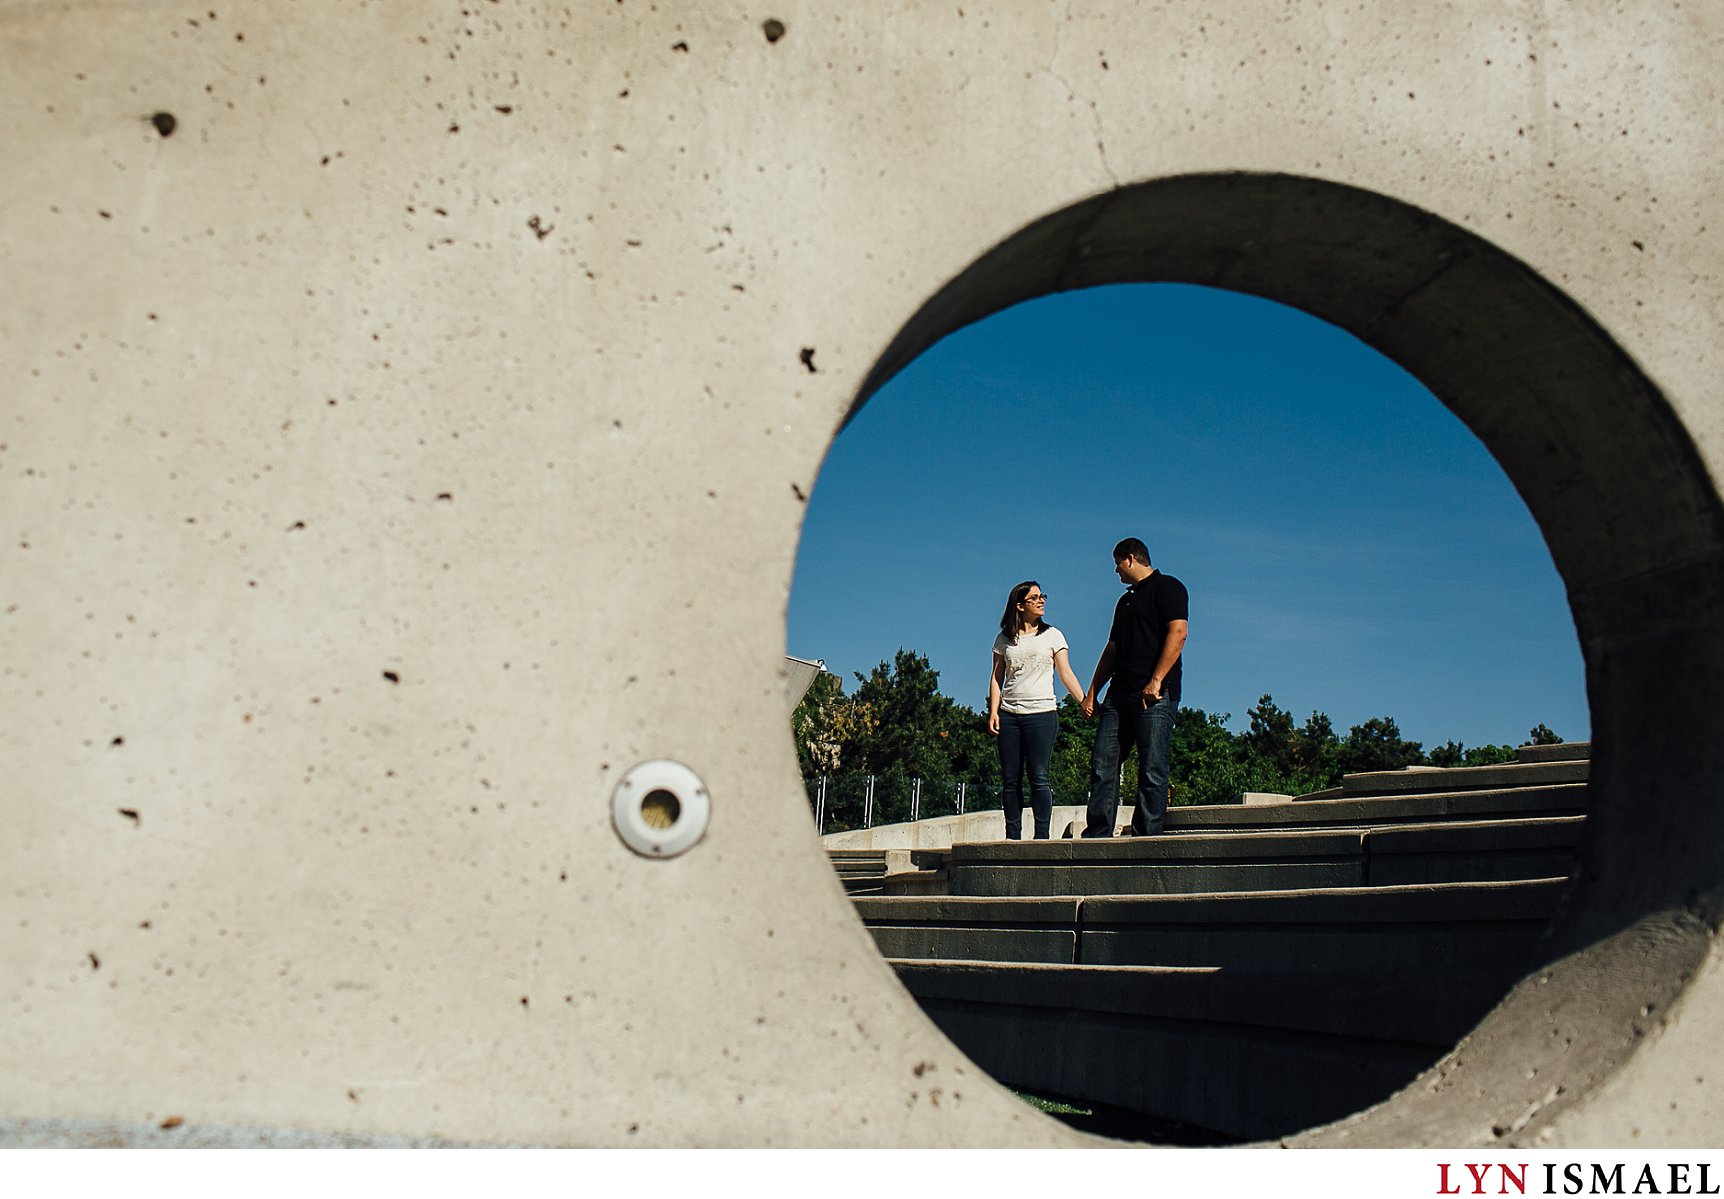 Using shapes for composition outside the Ontario Science Centre for a couple's engagement session.